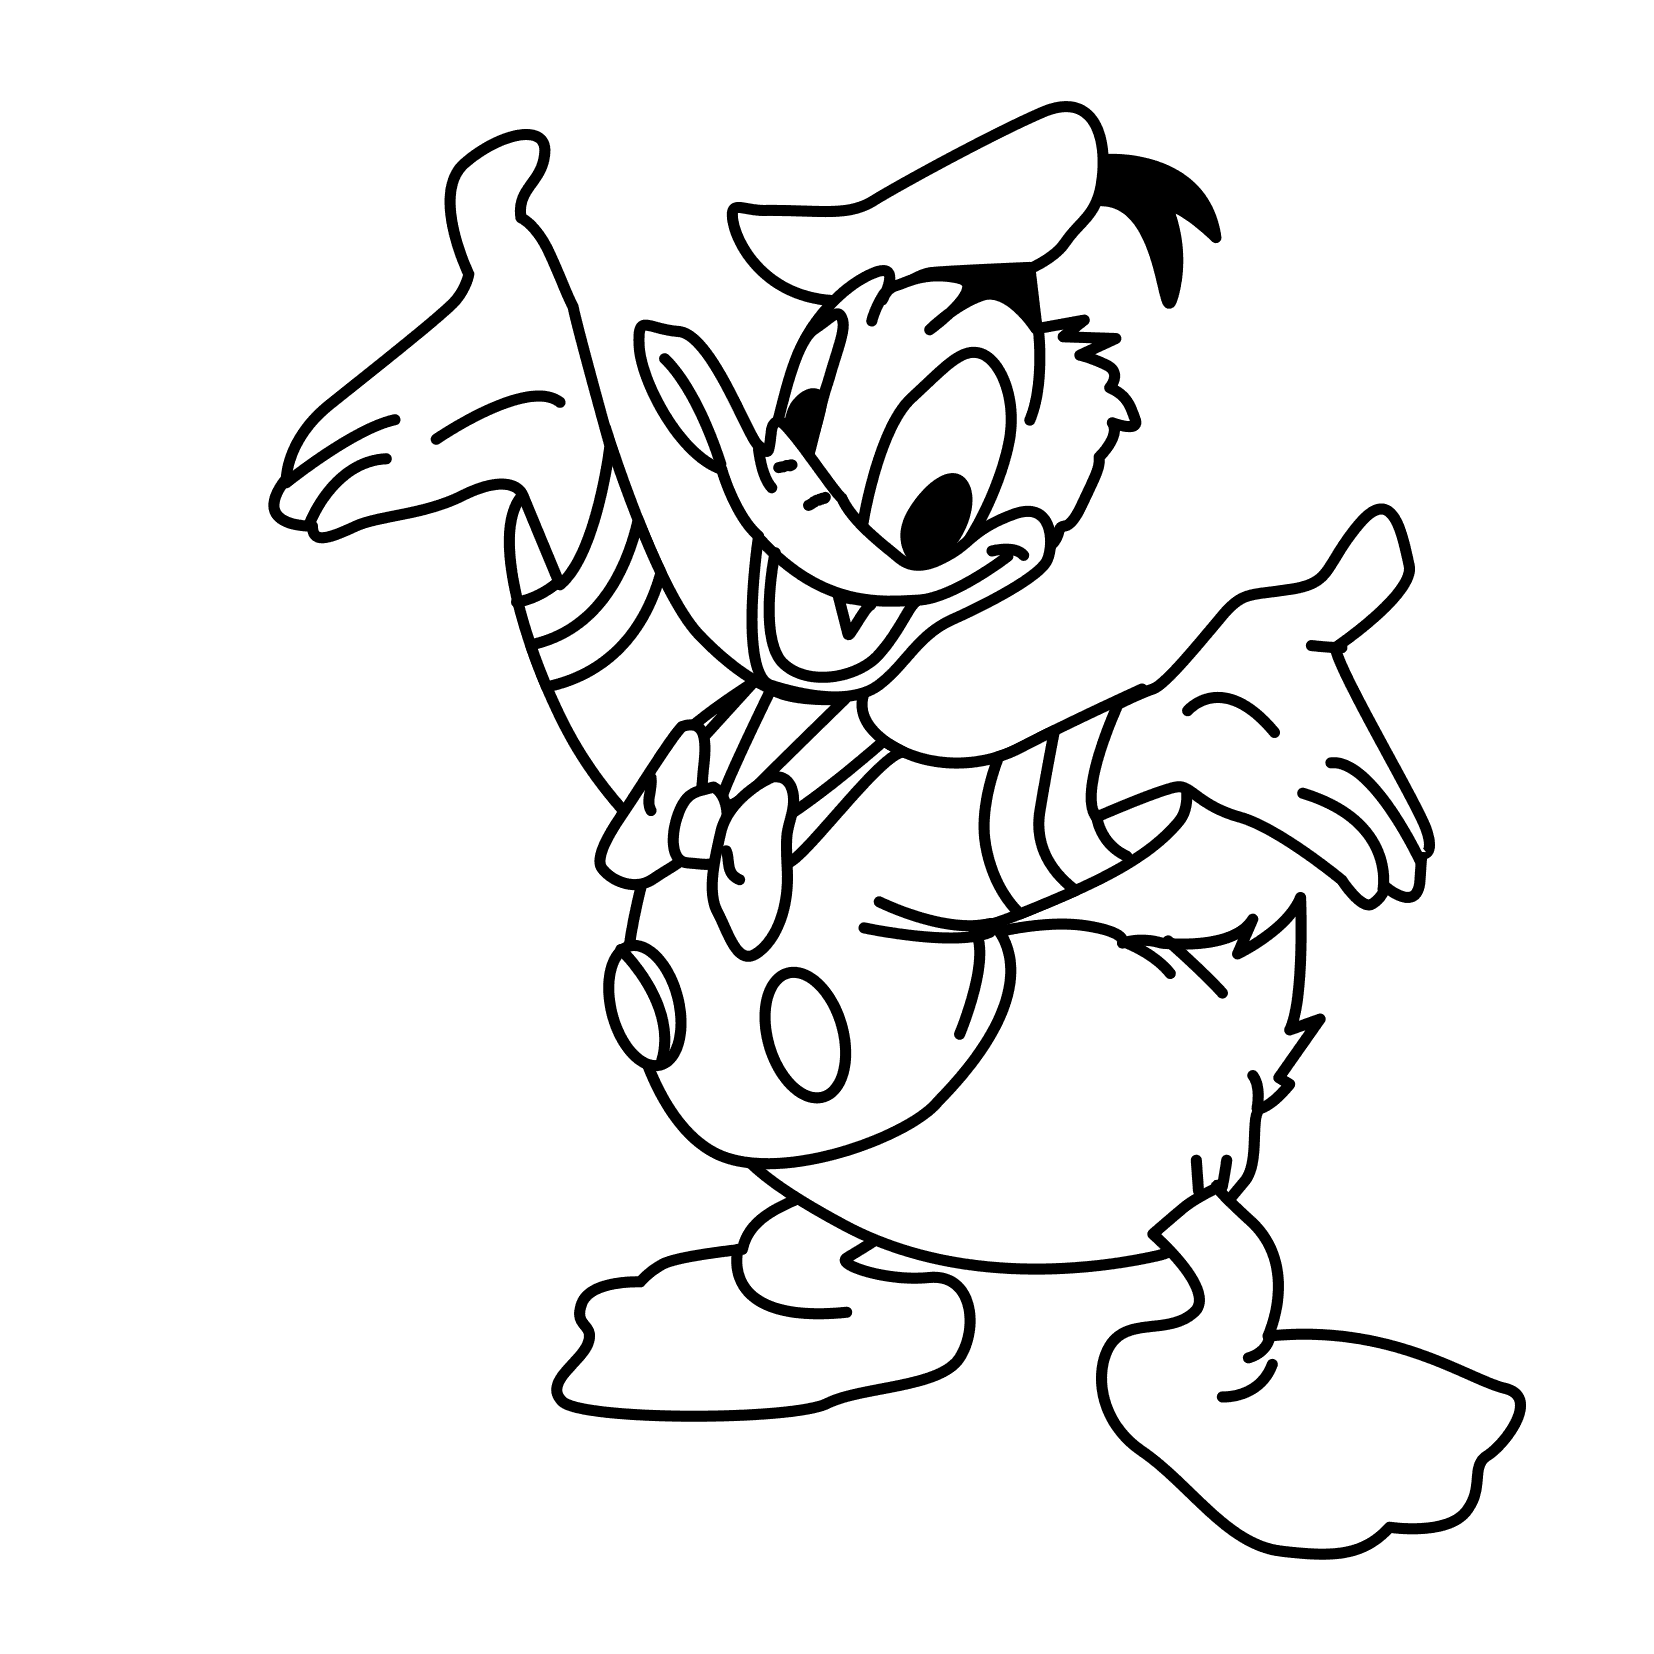 Donald Duck Line Drawing | Line Drawing - ClipArt Best ...